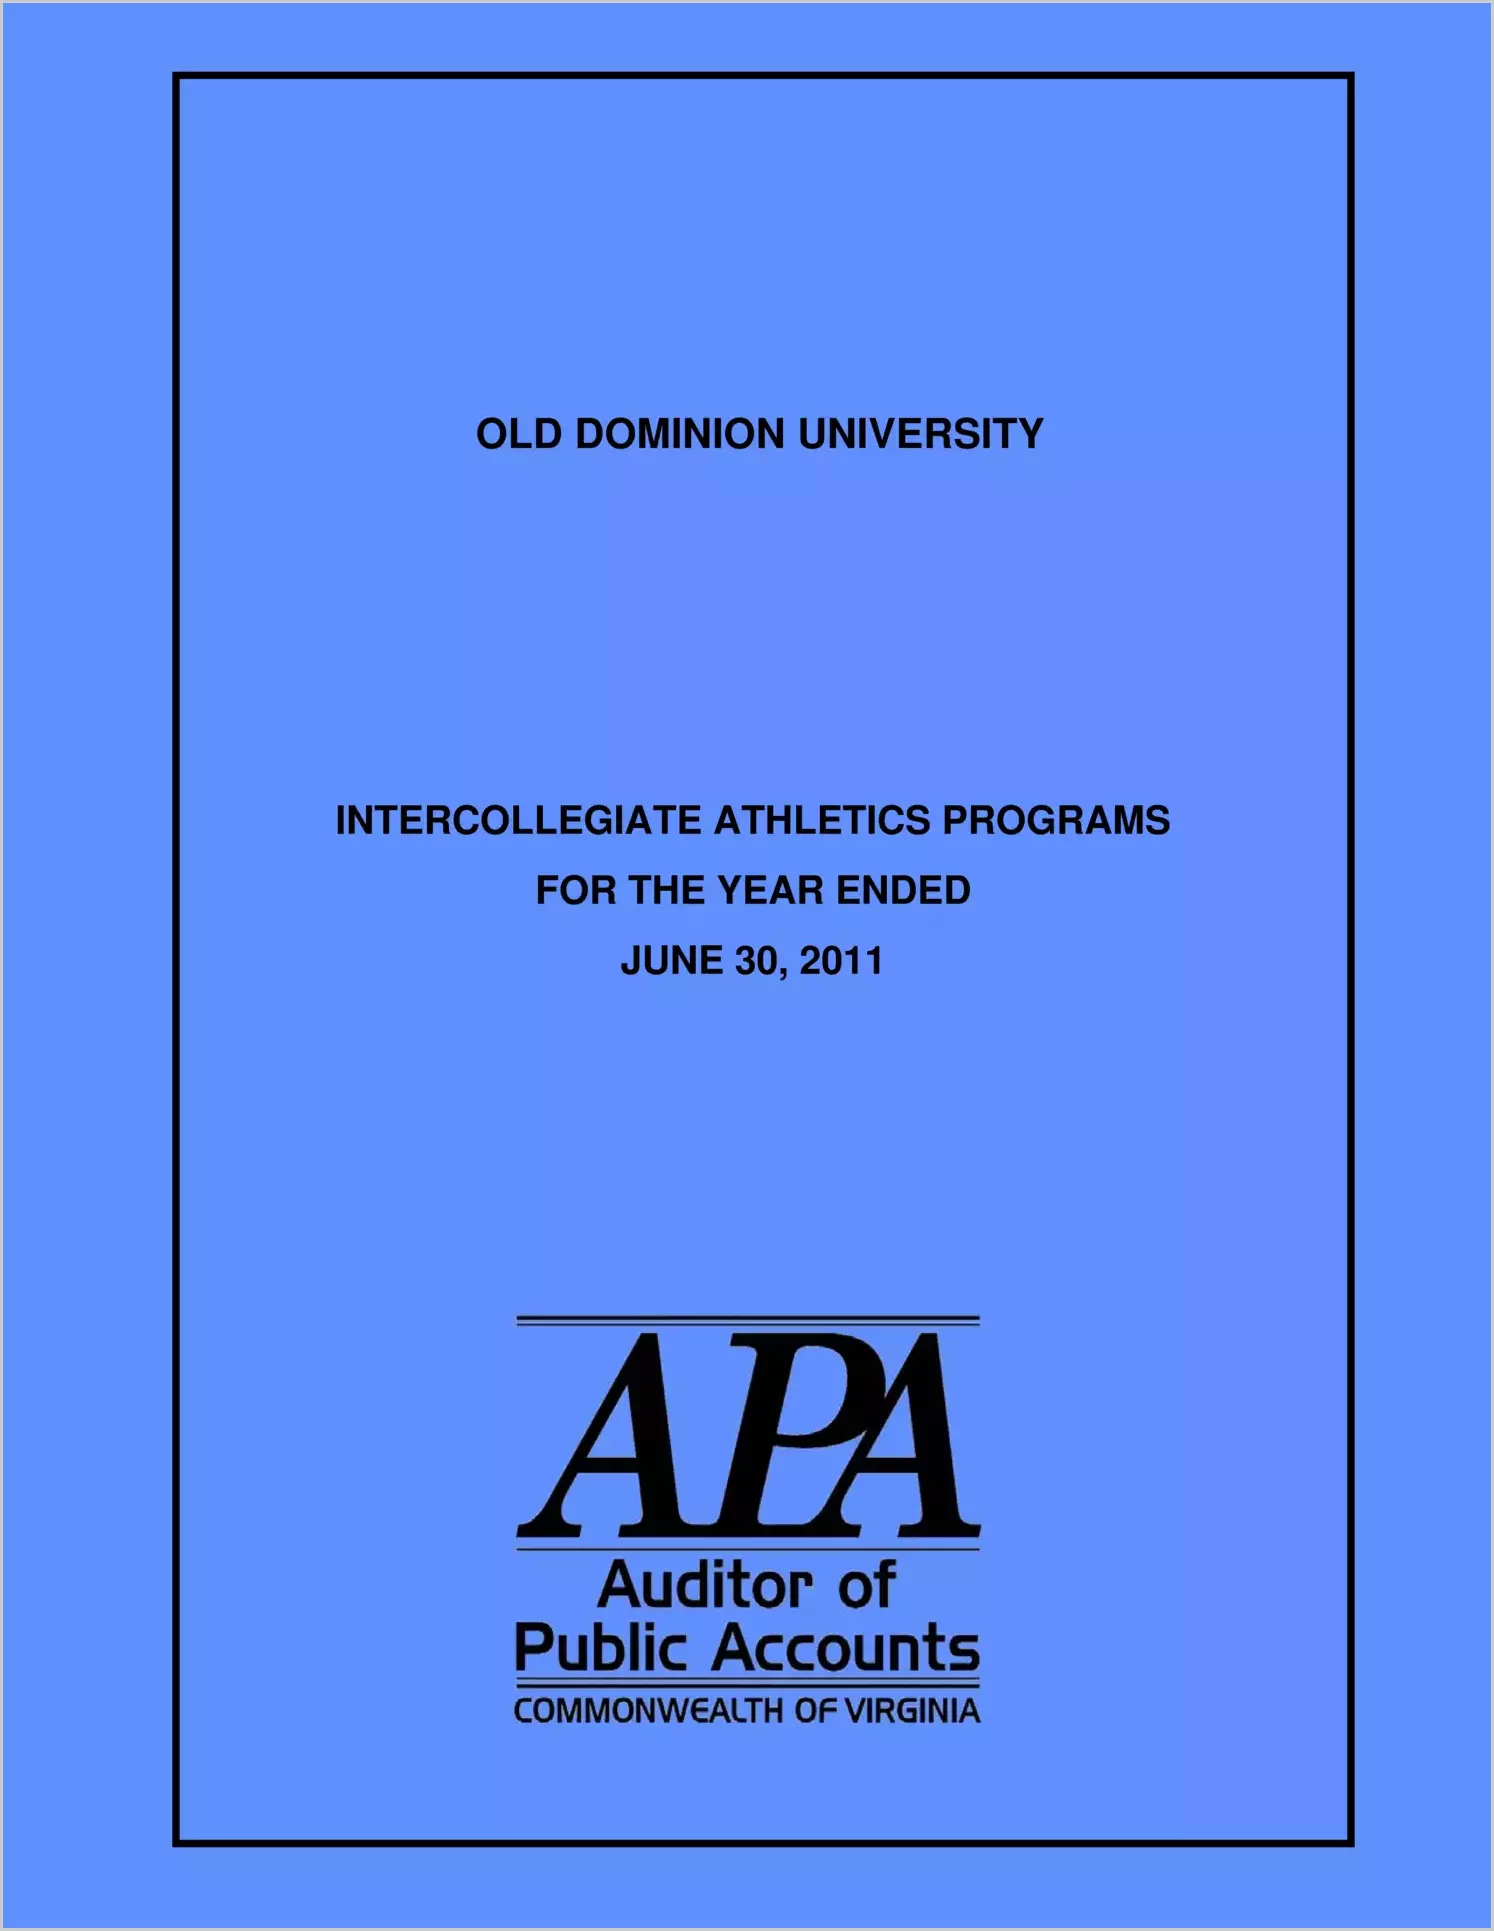 Old Dominion University Intercollegiate Athletic Programs for the year ended June 30, 2011